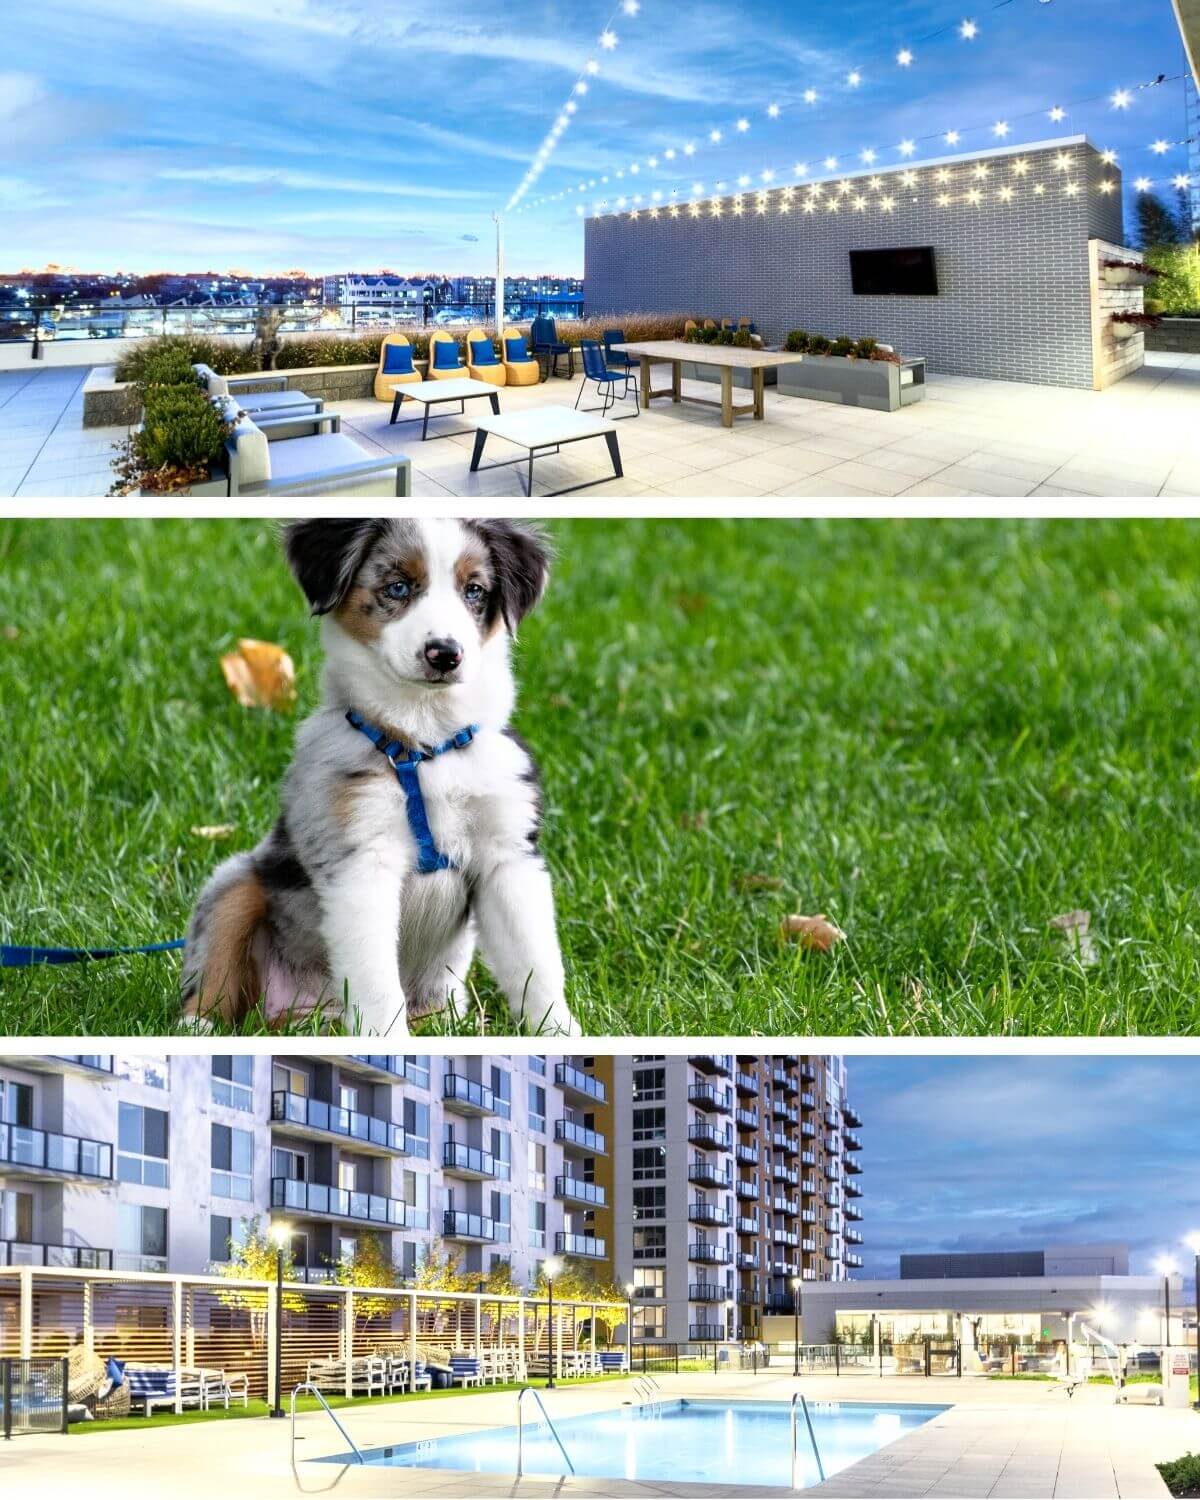 Fluffy dog, outdoor seating area and swimming pool